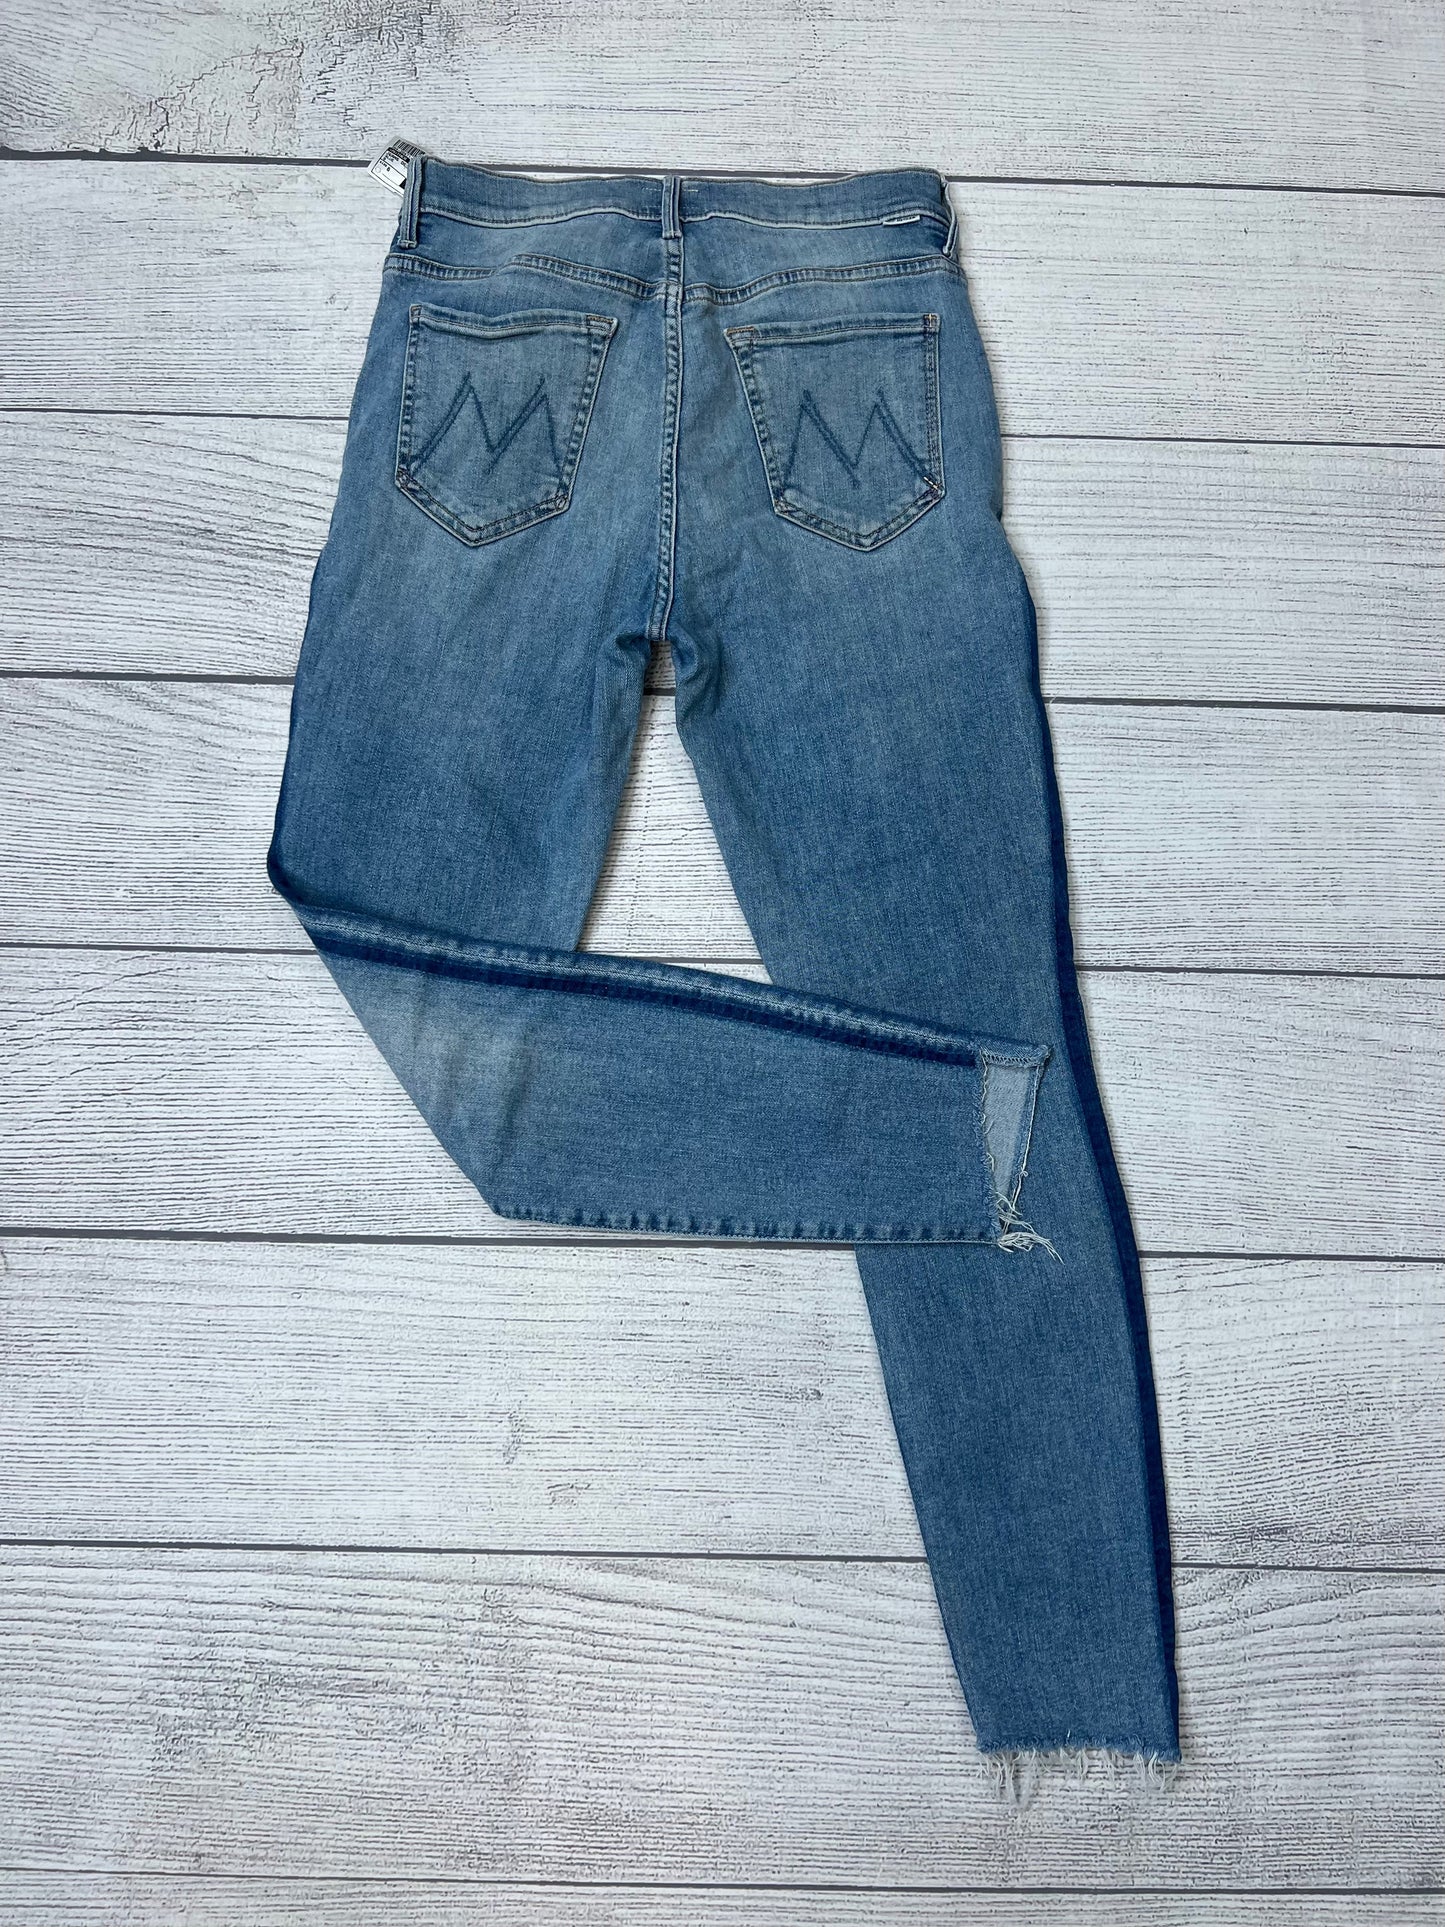 Jeans Designer By Mother Jeans  Size: 8